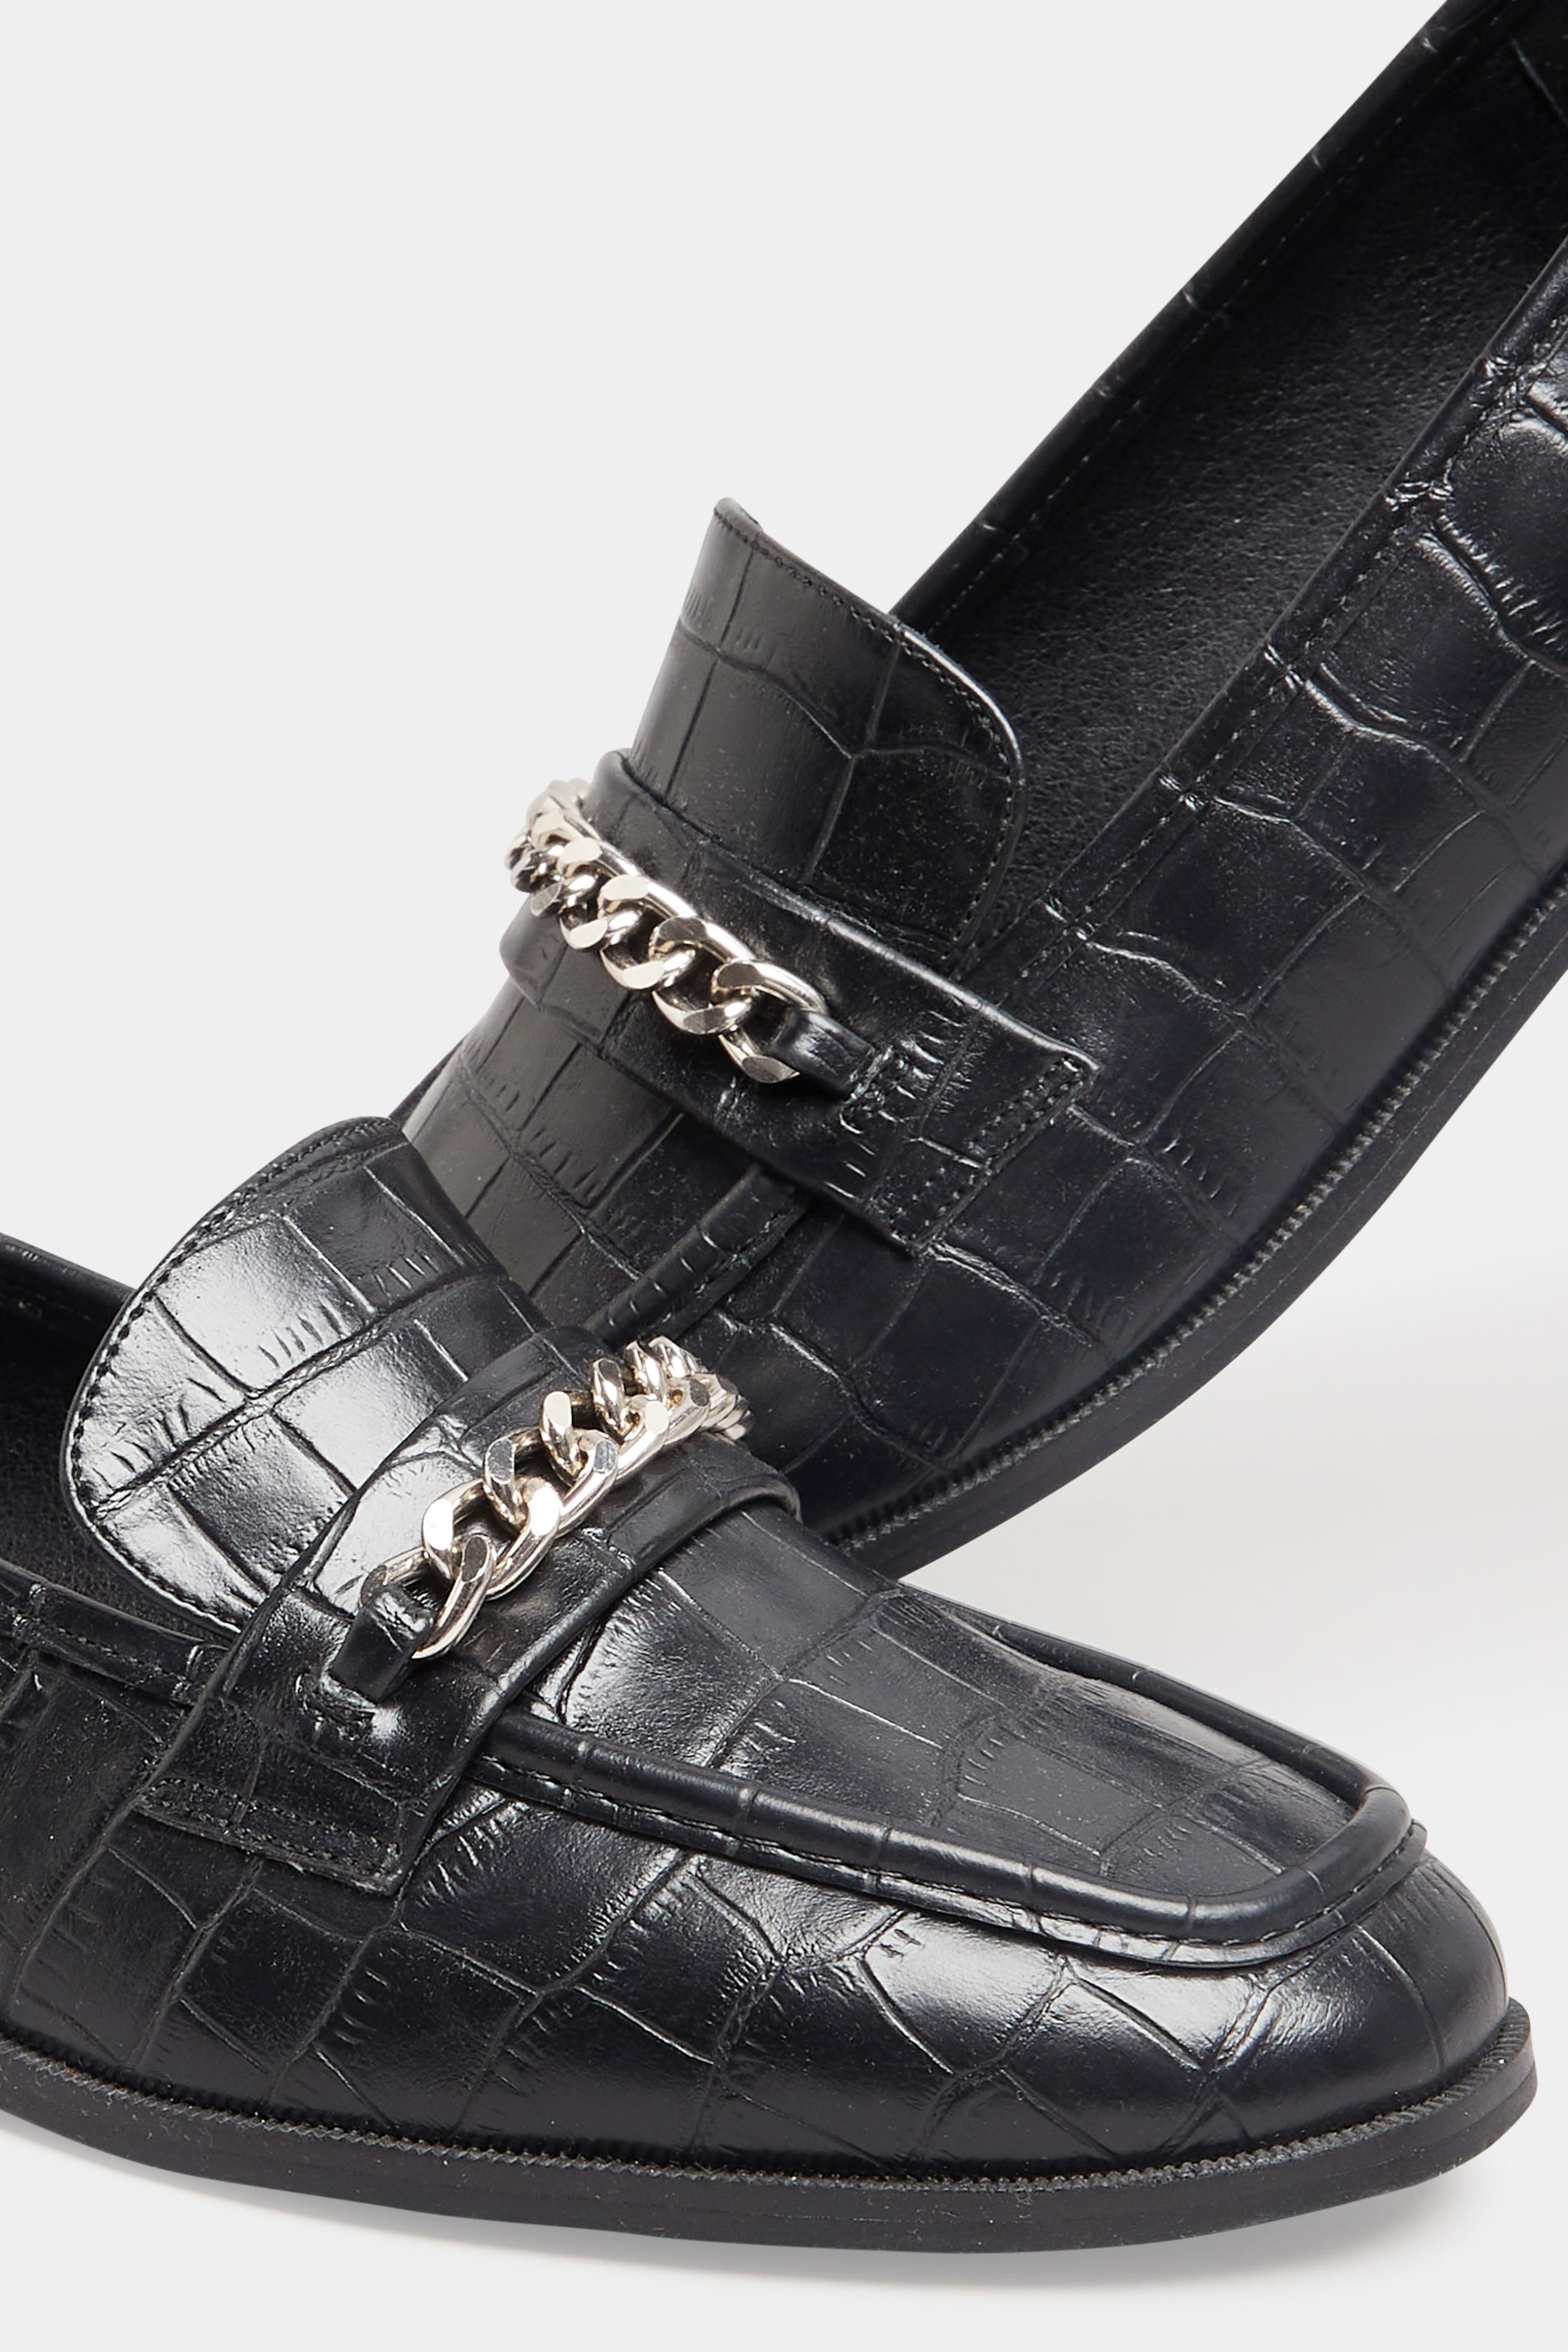 Tabitha: Black Croc Leather - Loafers for Bunions | Sole Bliss